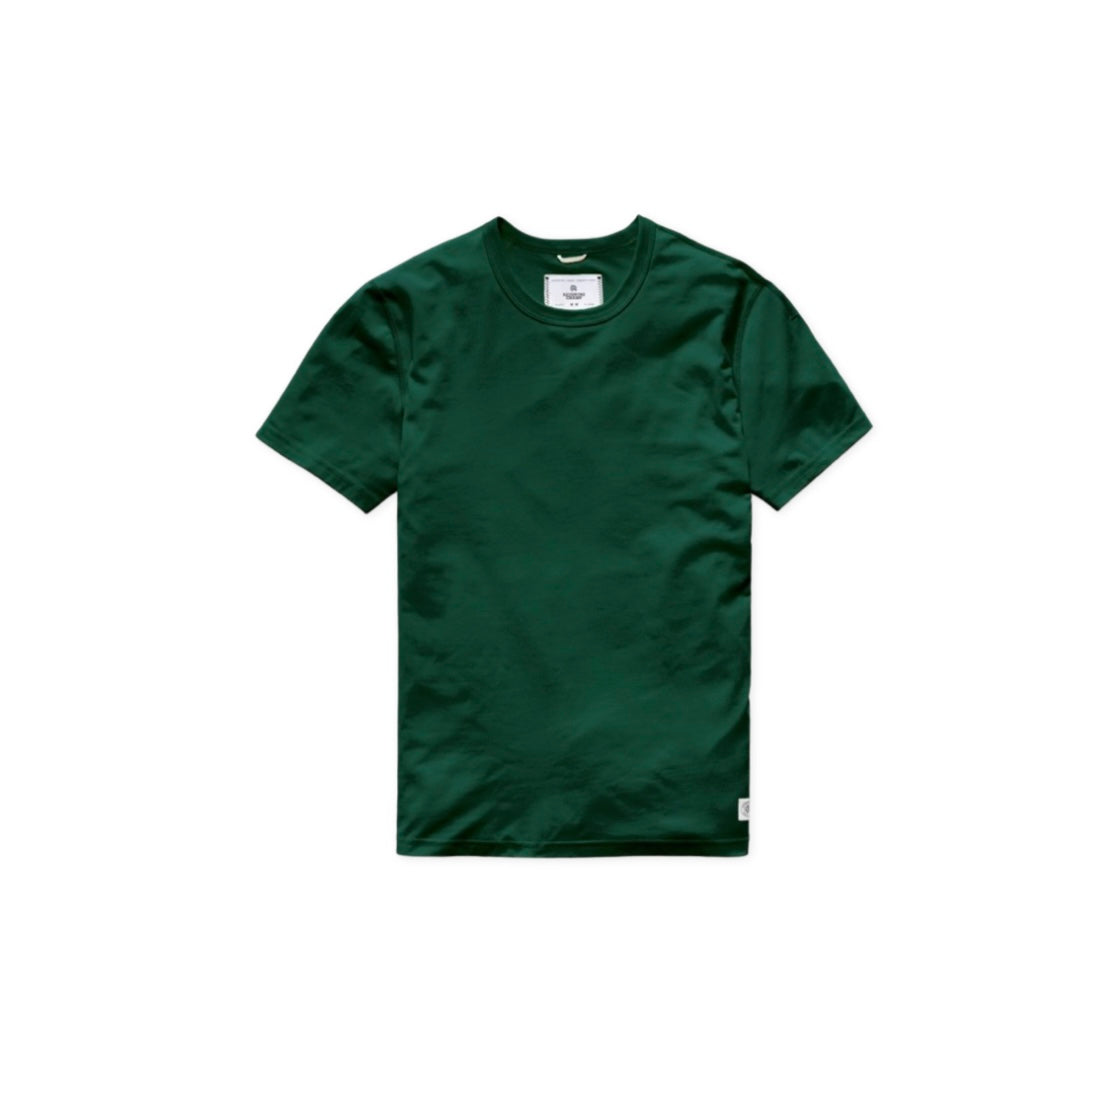 REIGNING CHAMP Copper Jersey T-shirt